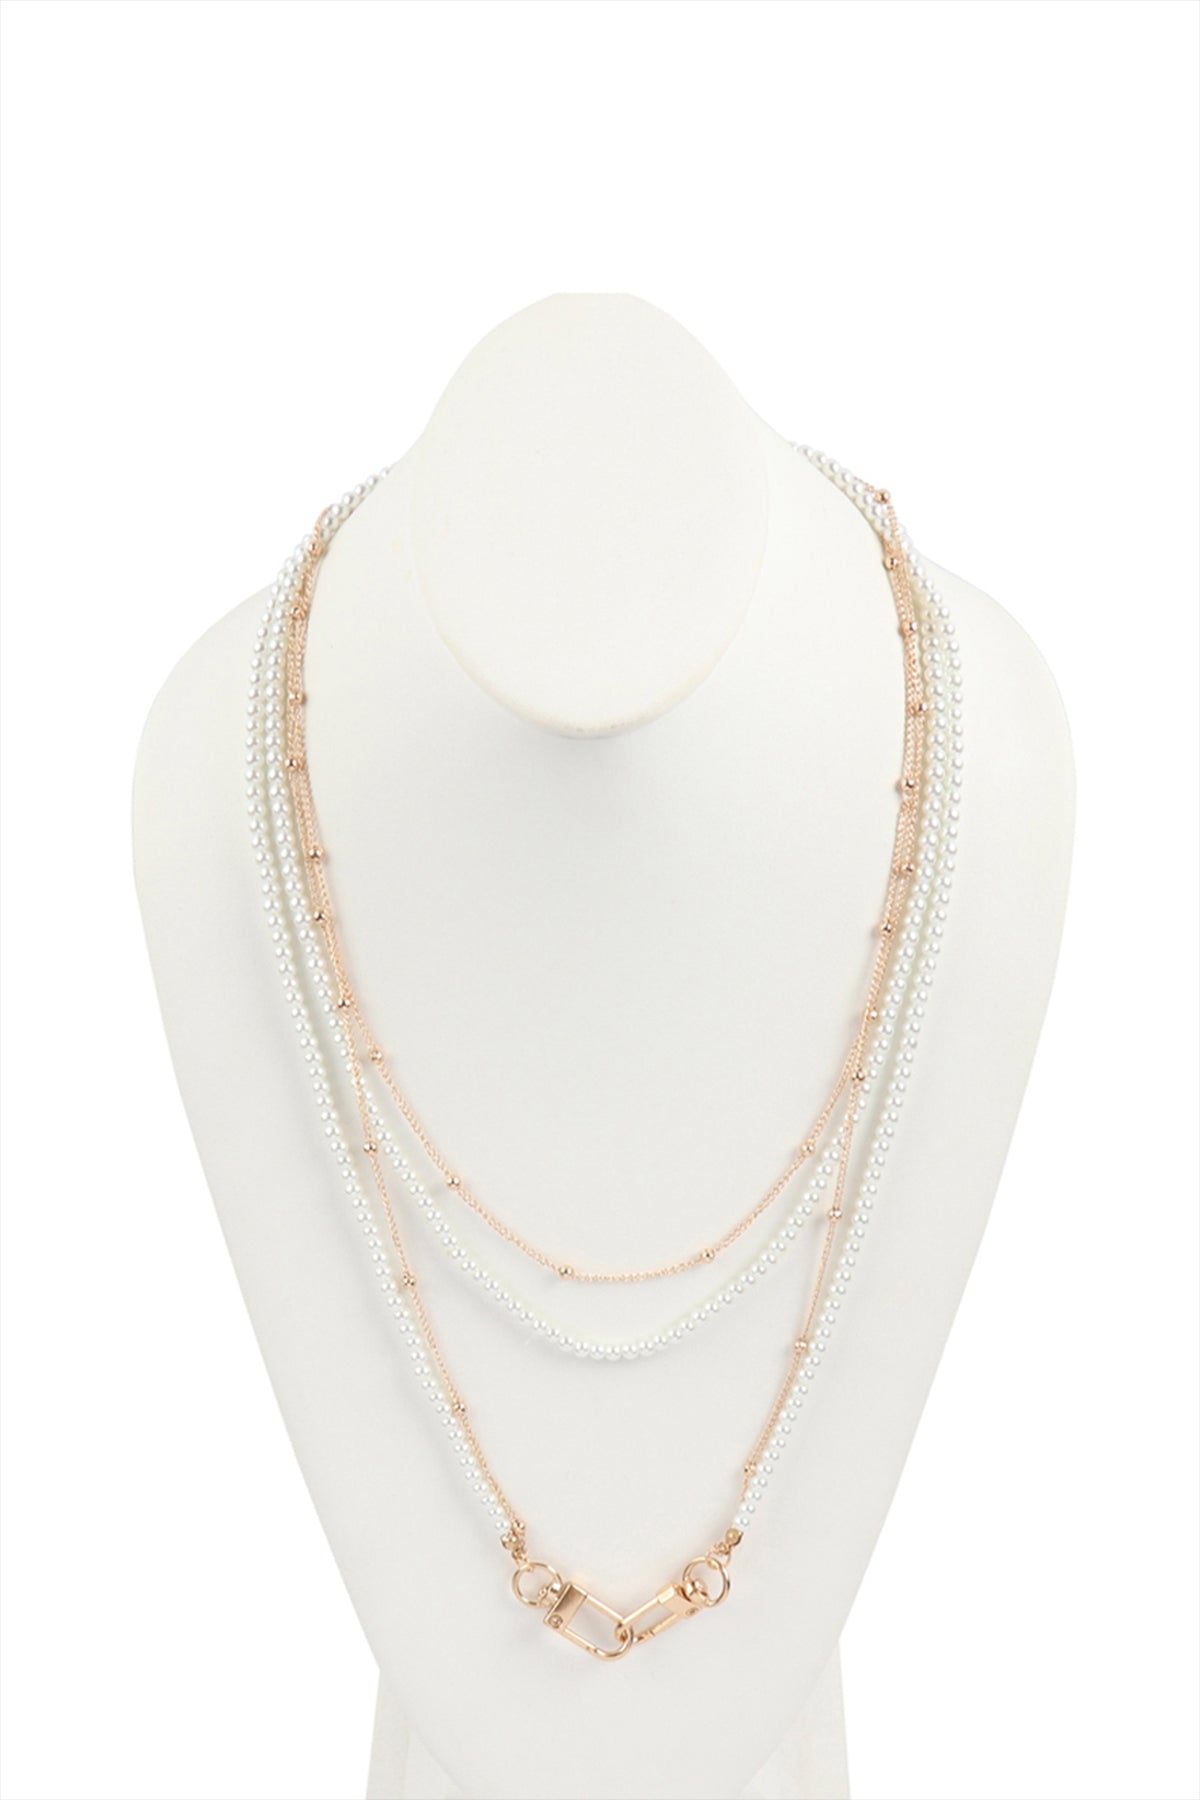 MULTI LAYER BEADED PEARL CONVERTIBLE MASKS CHAIN OR NECKLACE BAG CHAIN